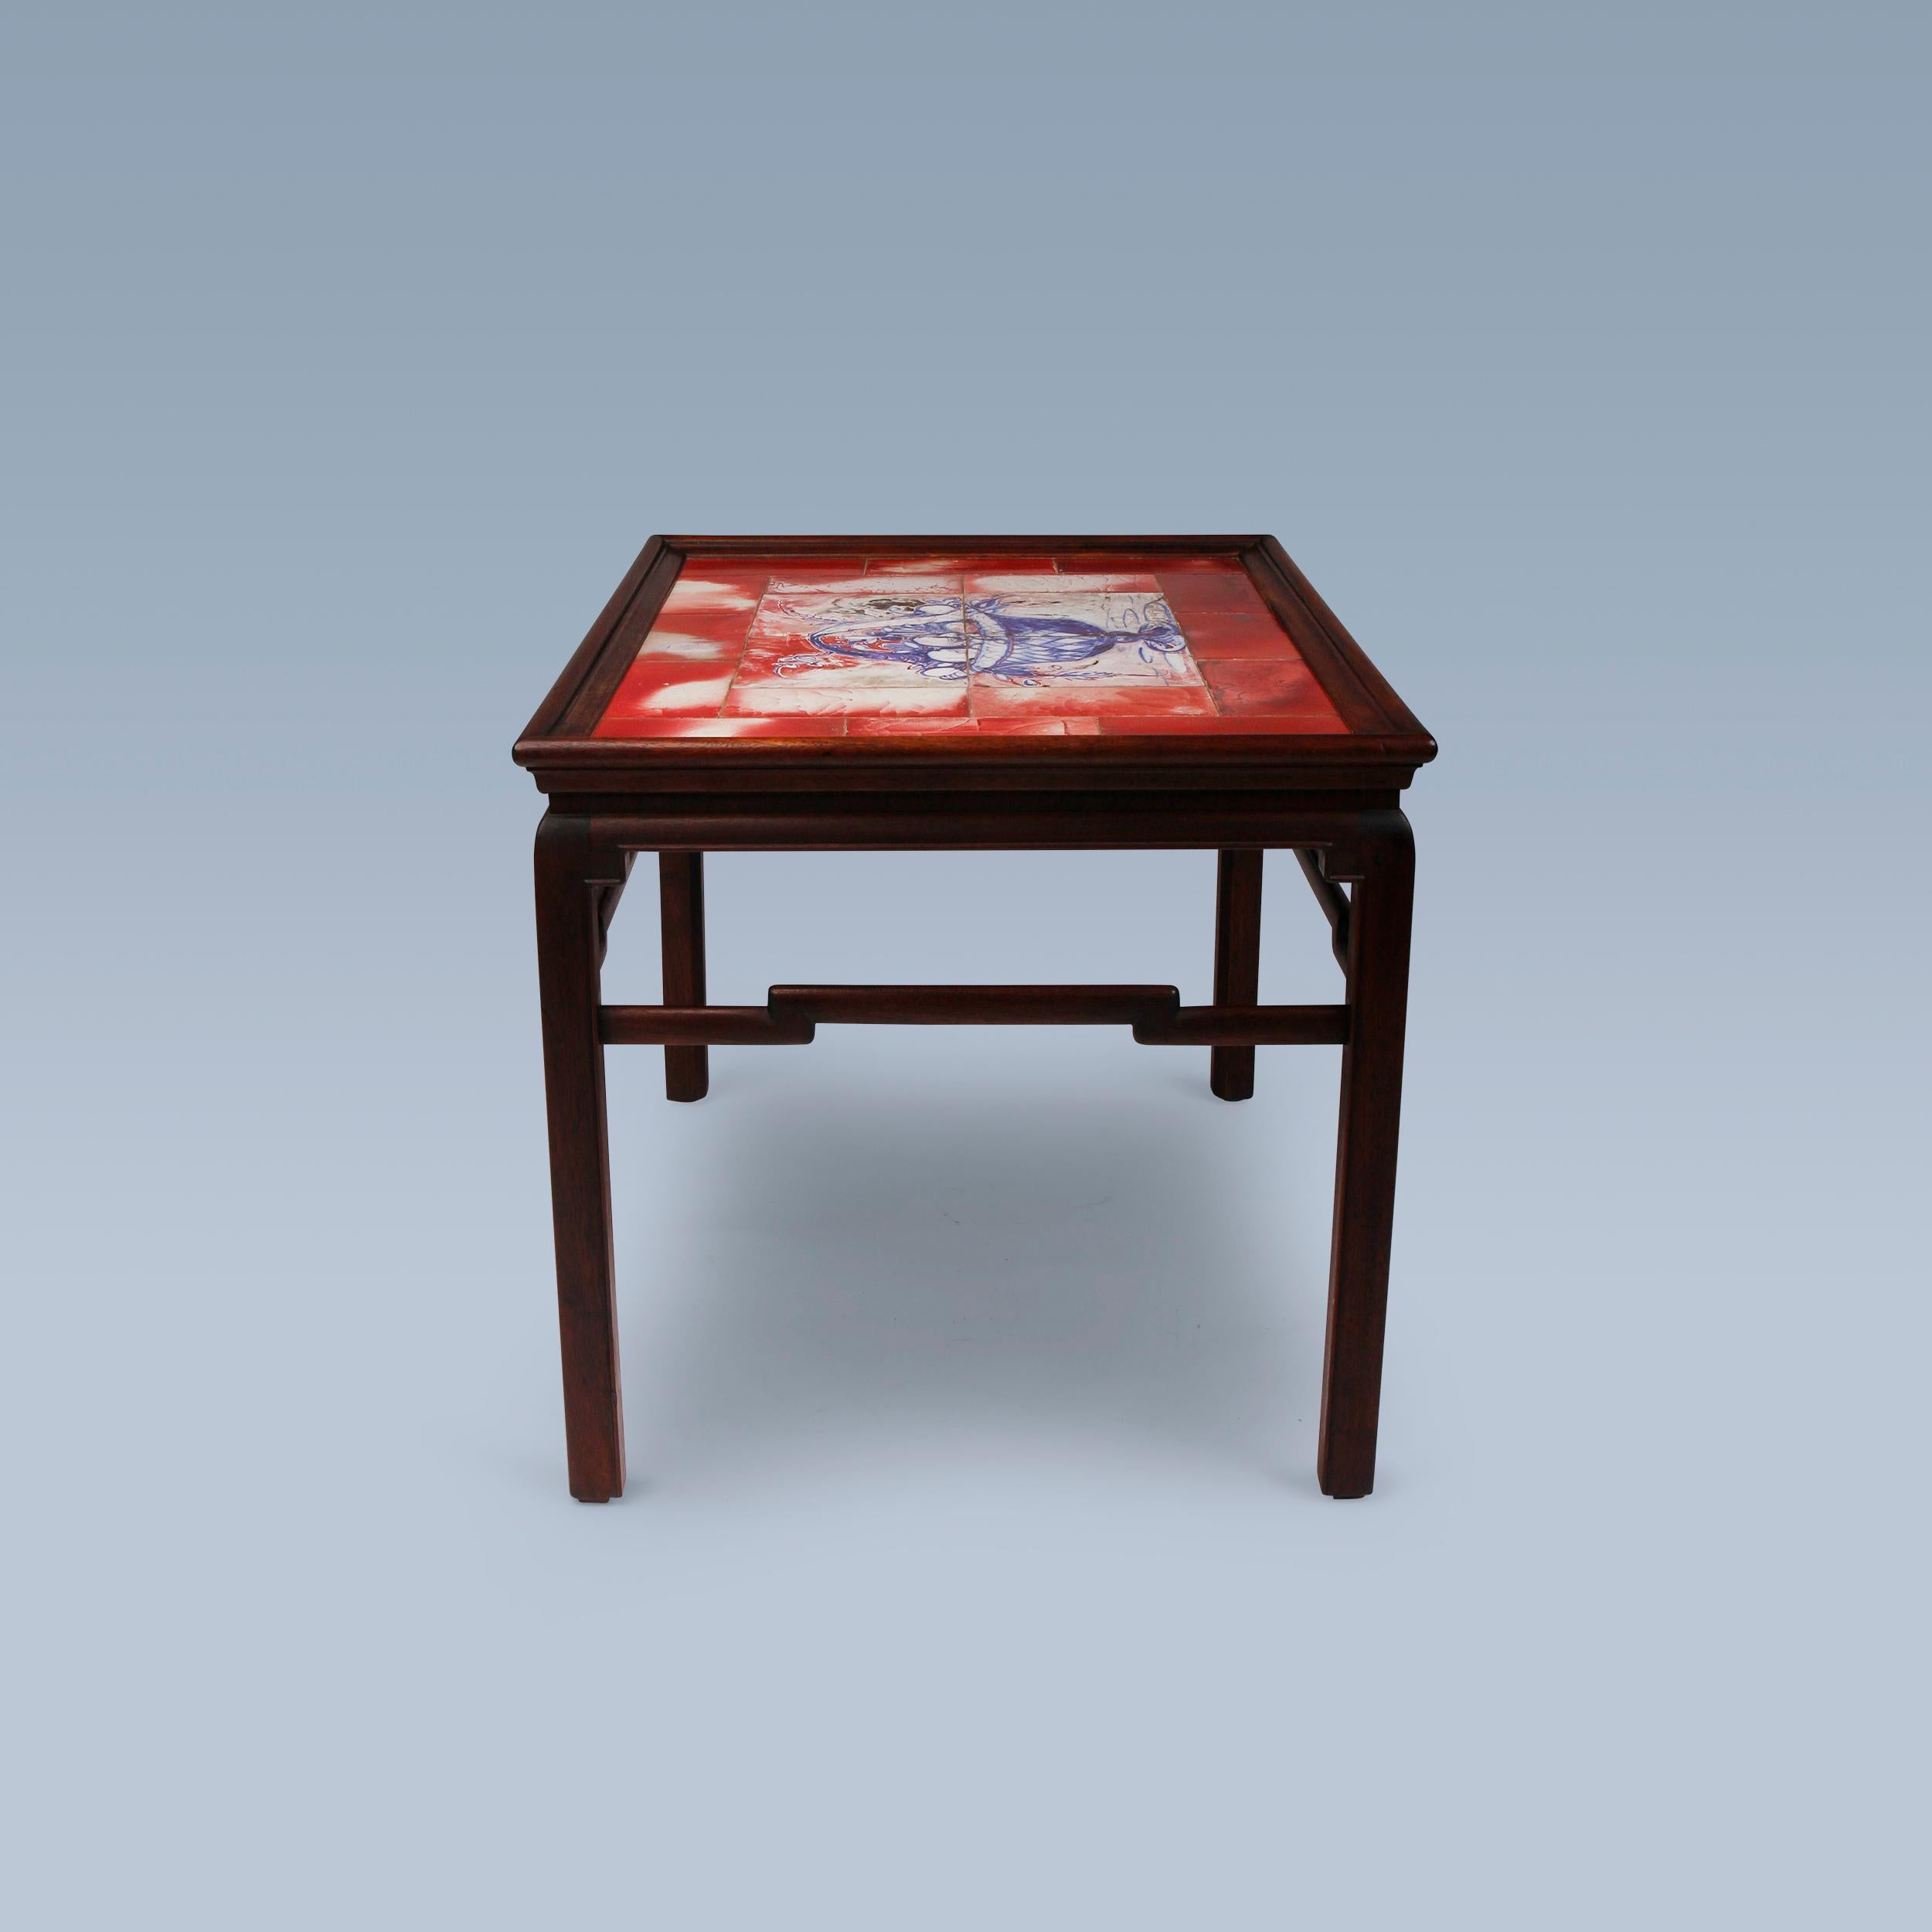 This so-called Chinese mahogany coffee table was executed by cabinetmaker Frits Henningsen ca. in the 1930s.

On top it has inlaid unique tiles depicting a fruit basket with decorative flowers. The tiles are handcoloured by painter and ceramist Jens